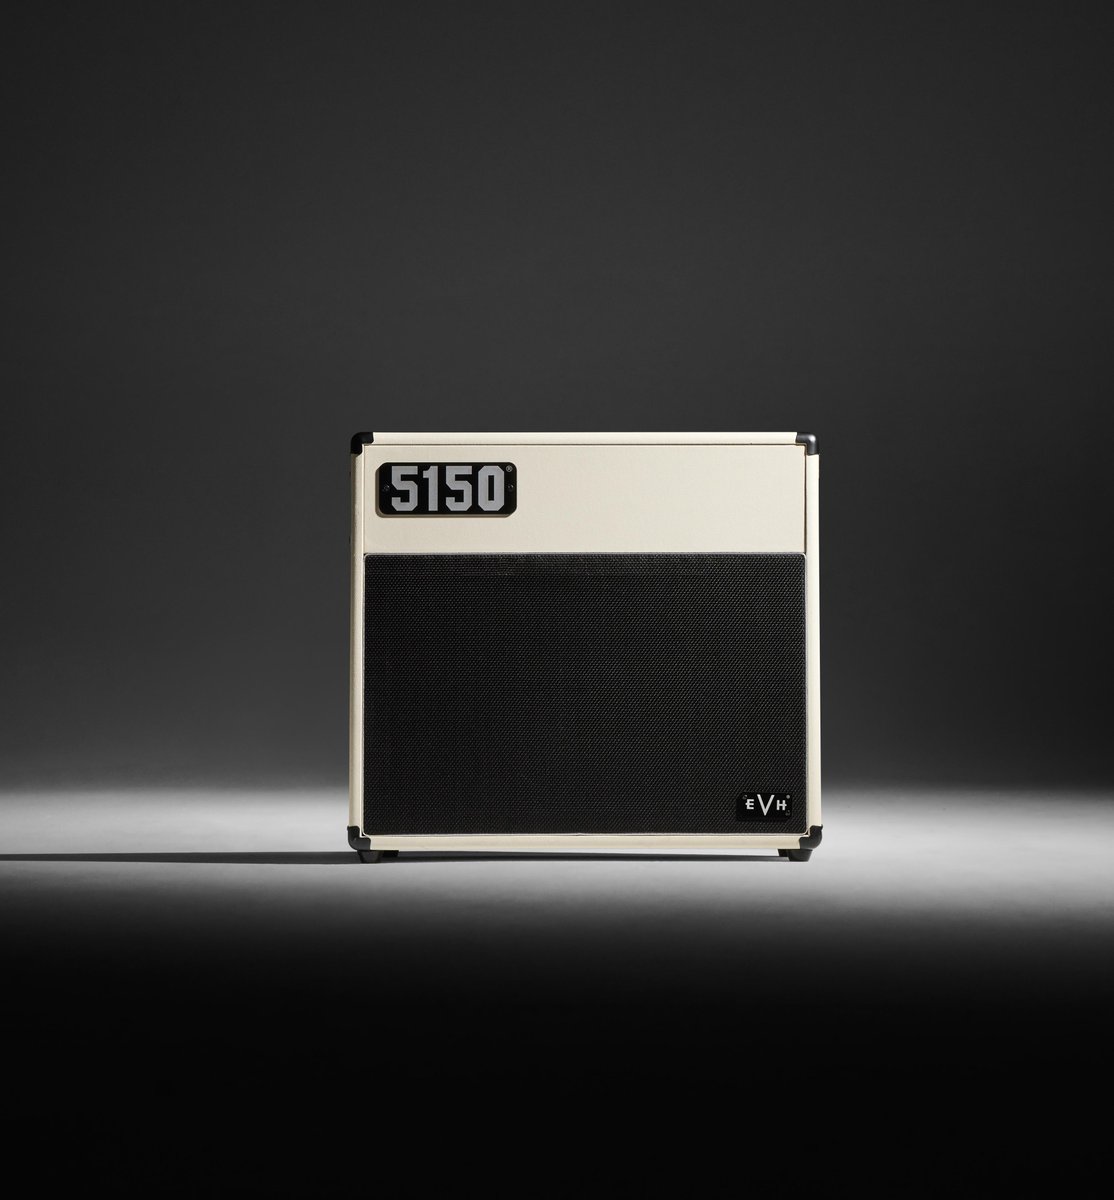 Sporting sophisticated and distinctive EVH style, the 5150 Iconic Series 40-watt 1x12 combo is wrapped in Ivory textured vinyl with a black cloth front grille. Learn more: bit.ly/443w0ru